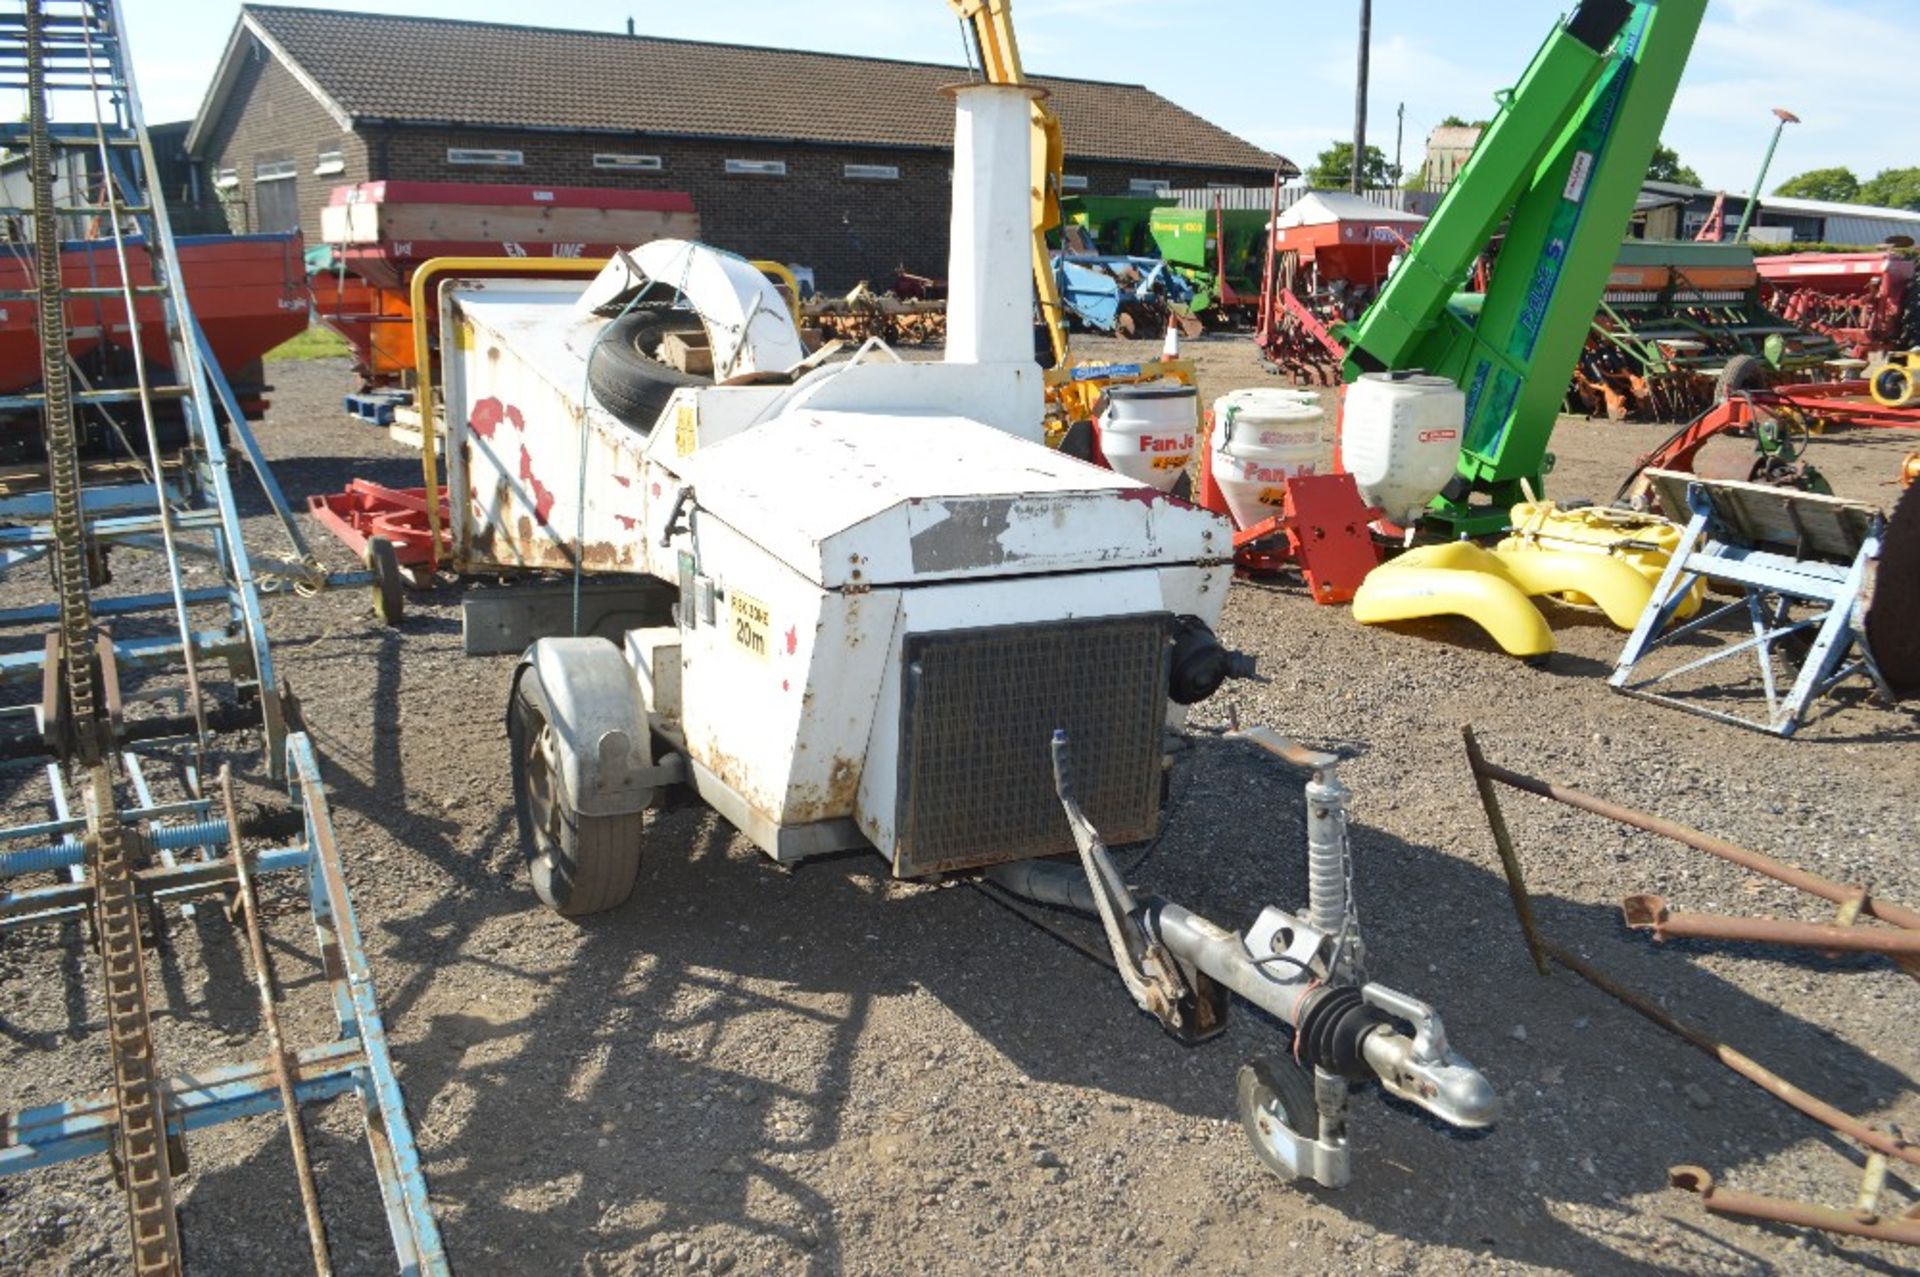 Commercial woodchipper on single axle fast tow chassis. Vendor reports engine requires repair/